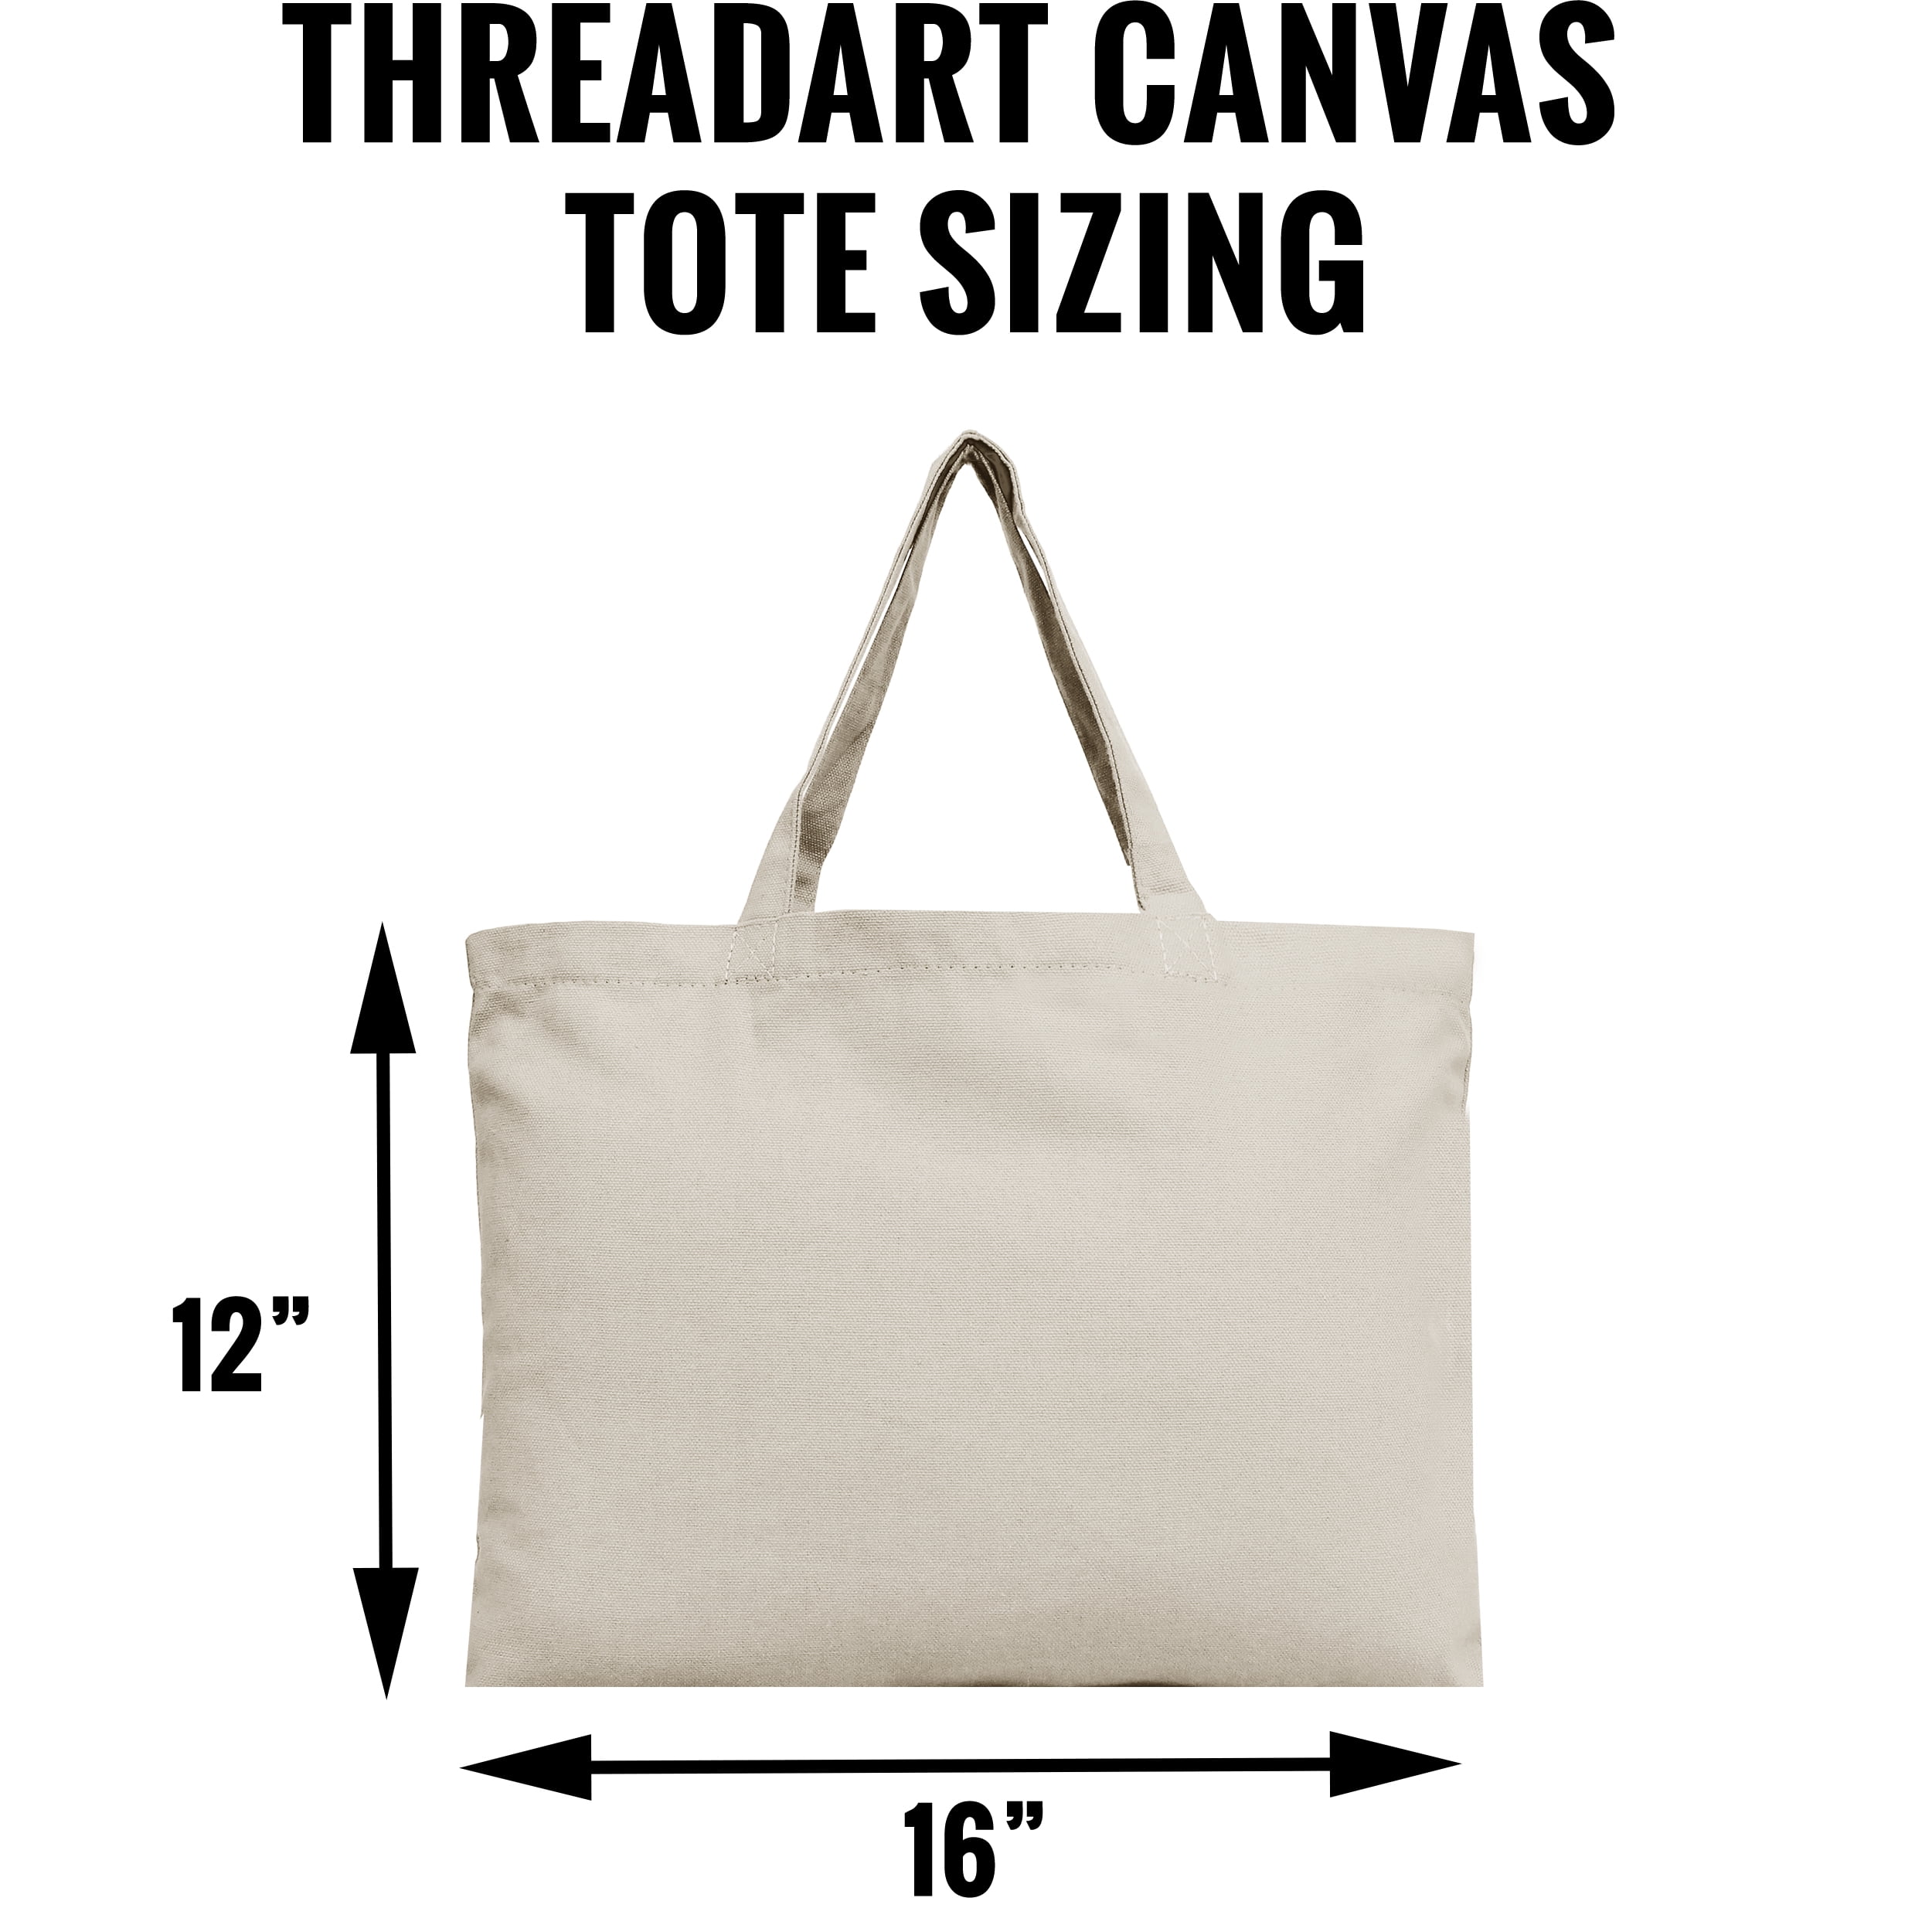 BLANK Canvas Sturdy TOTE BAG Crafts Shopping 5 COLORS Durable 100% Reinforced 